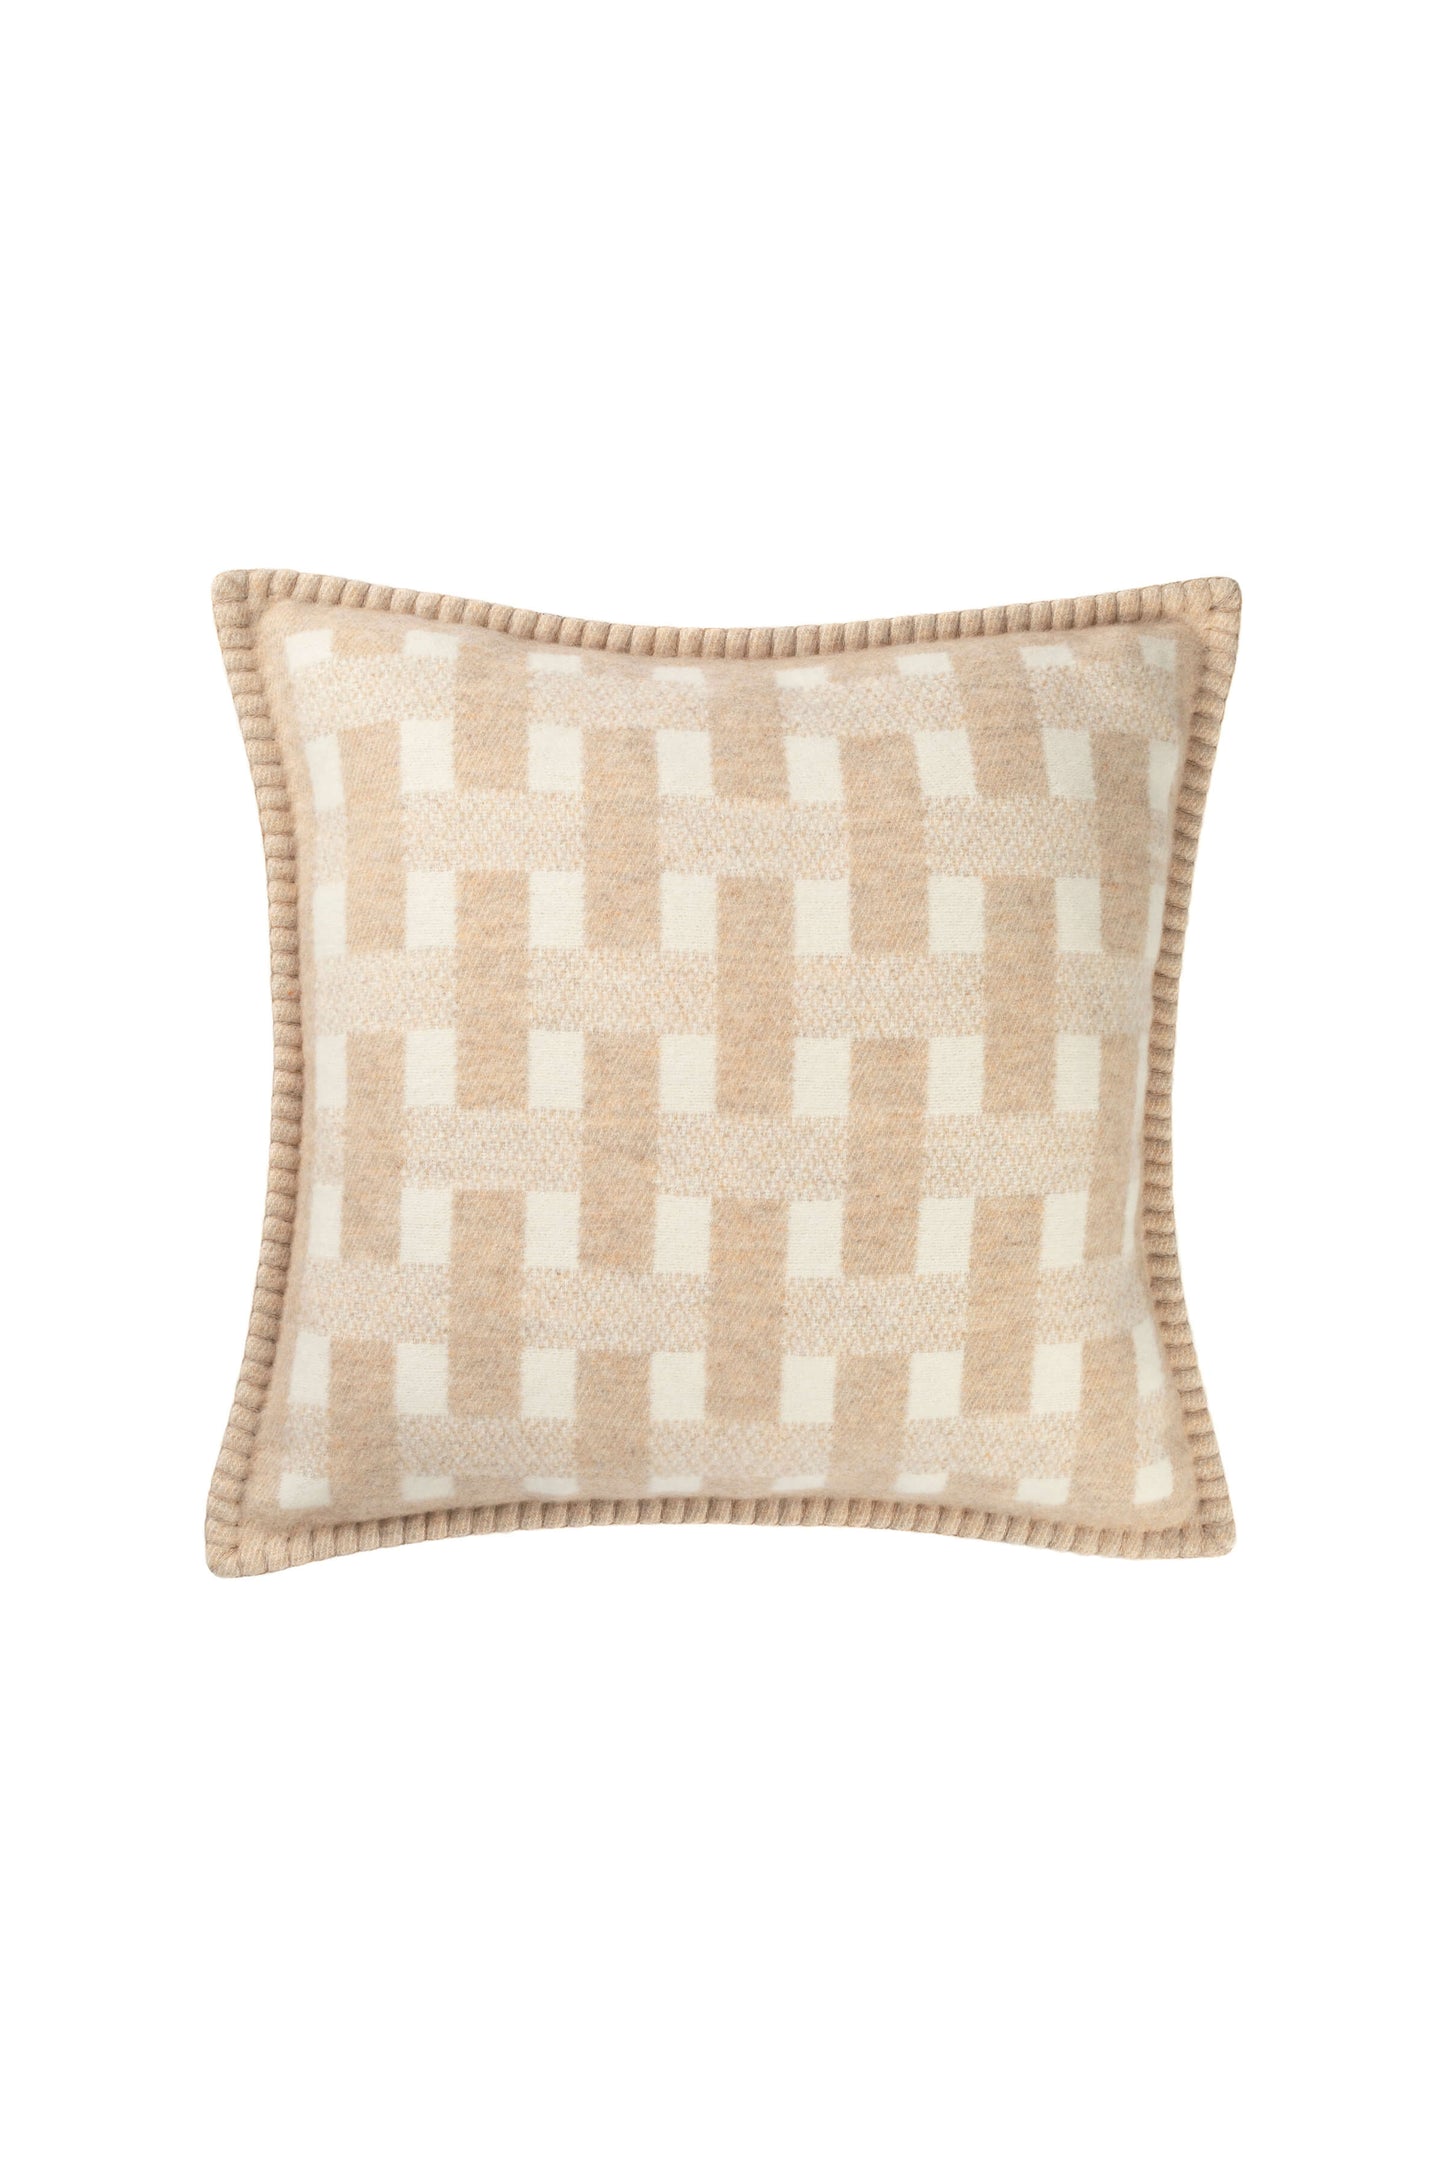 Johnstons of Elgin 2024 Home Collection Oatmeal & White Blanket Stitched Basketweave Cushion PB000059RU7447ONE